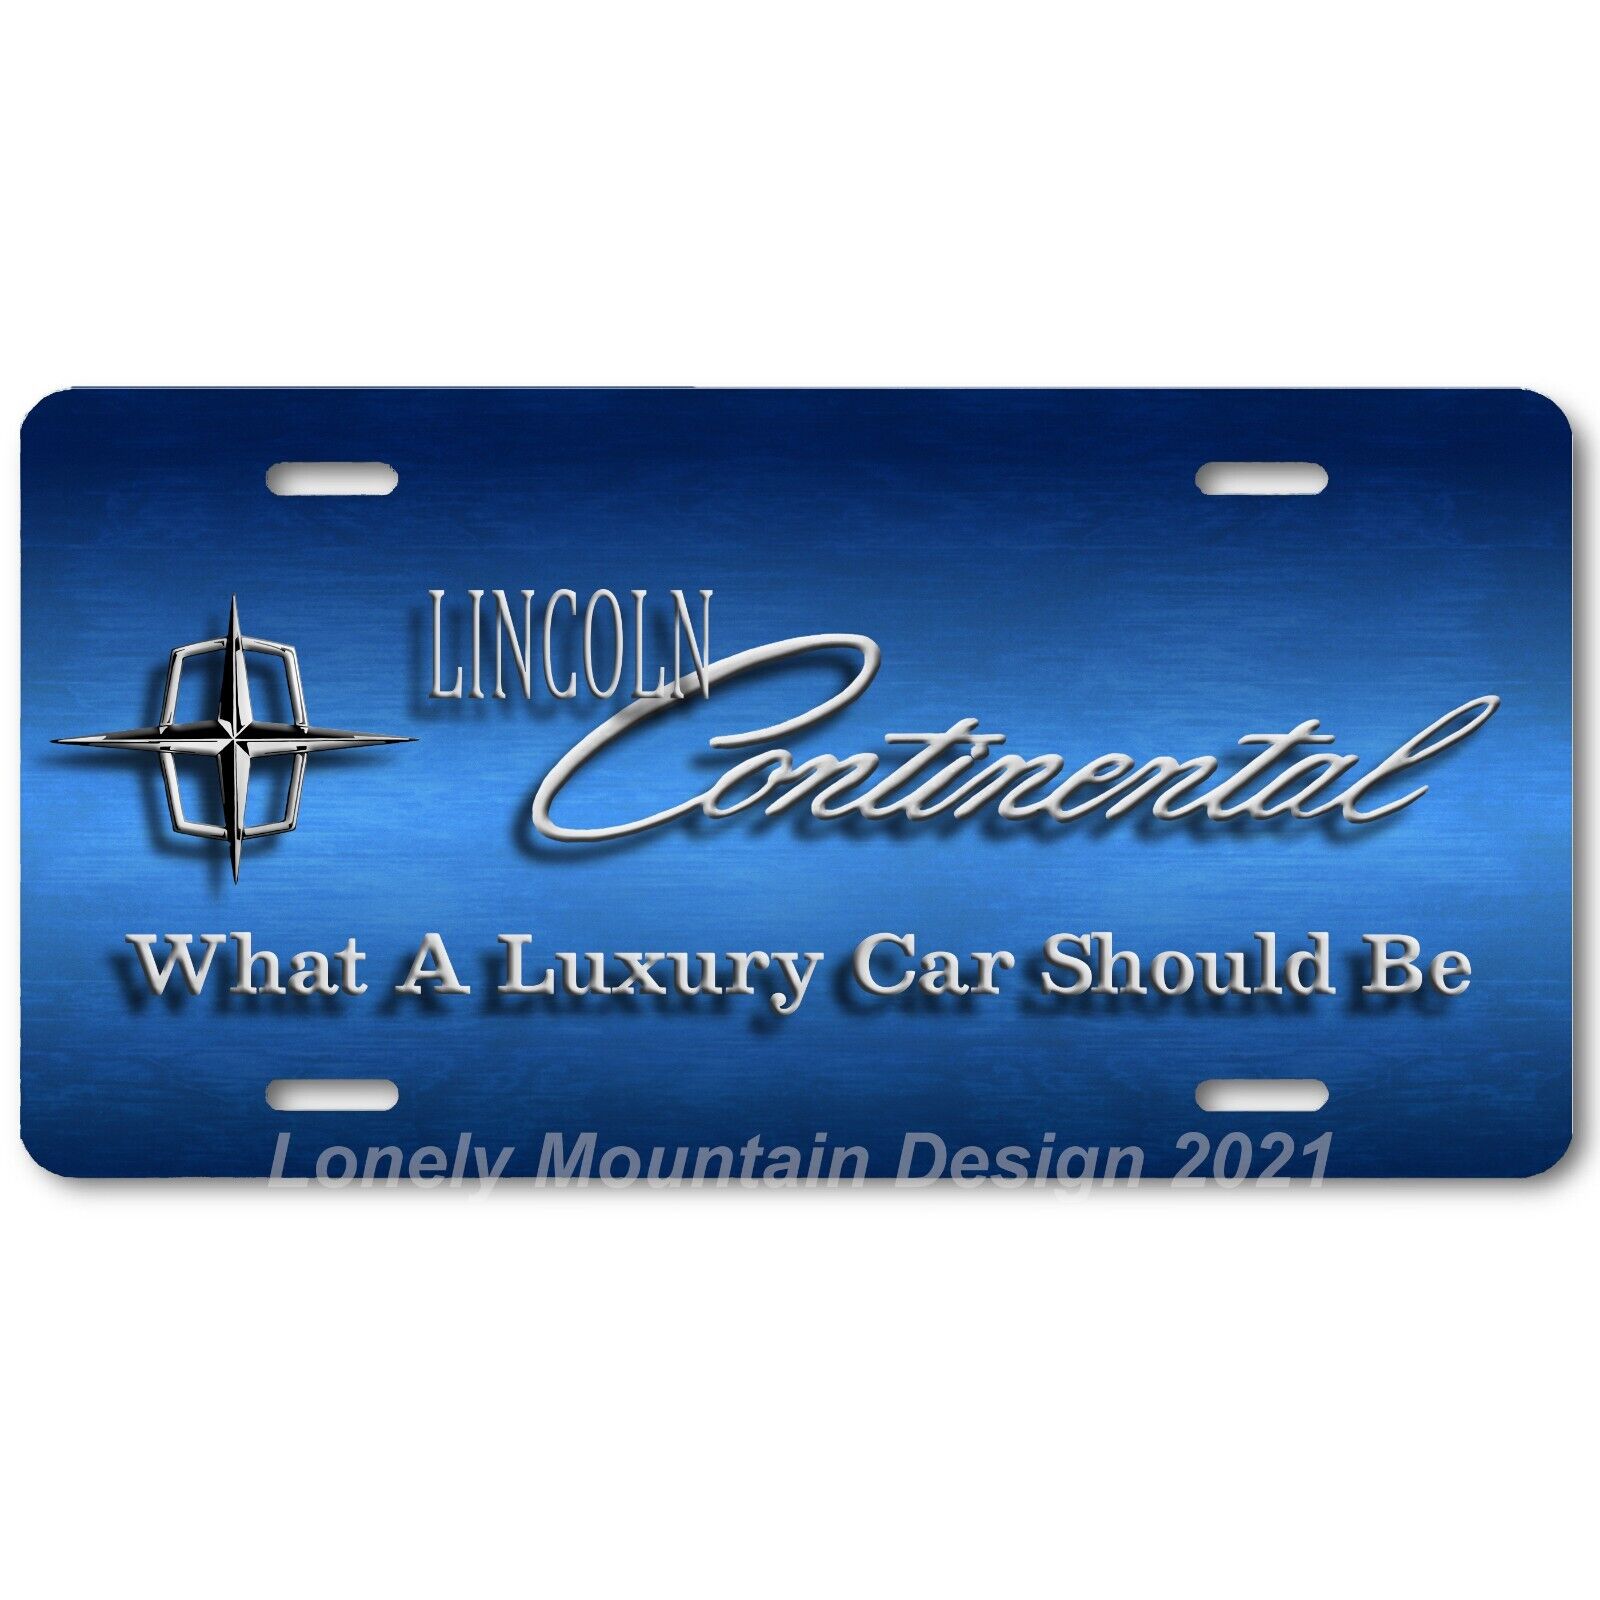 Lincoln Continental Inspired Art on Blue FLAT Aluminum Novelty License Tag Plate